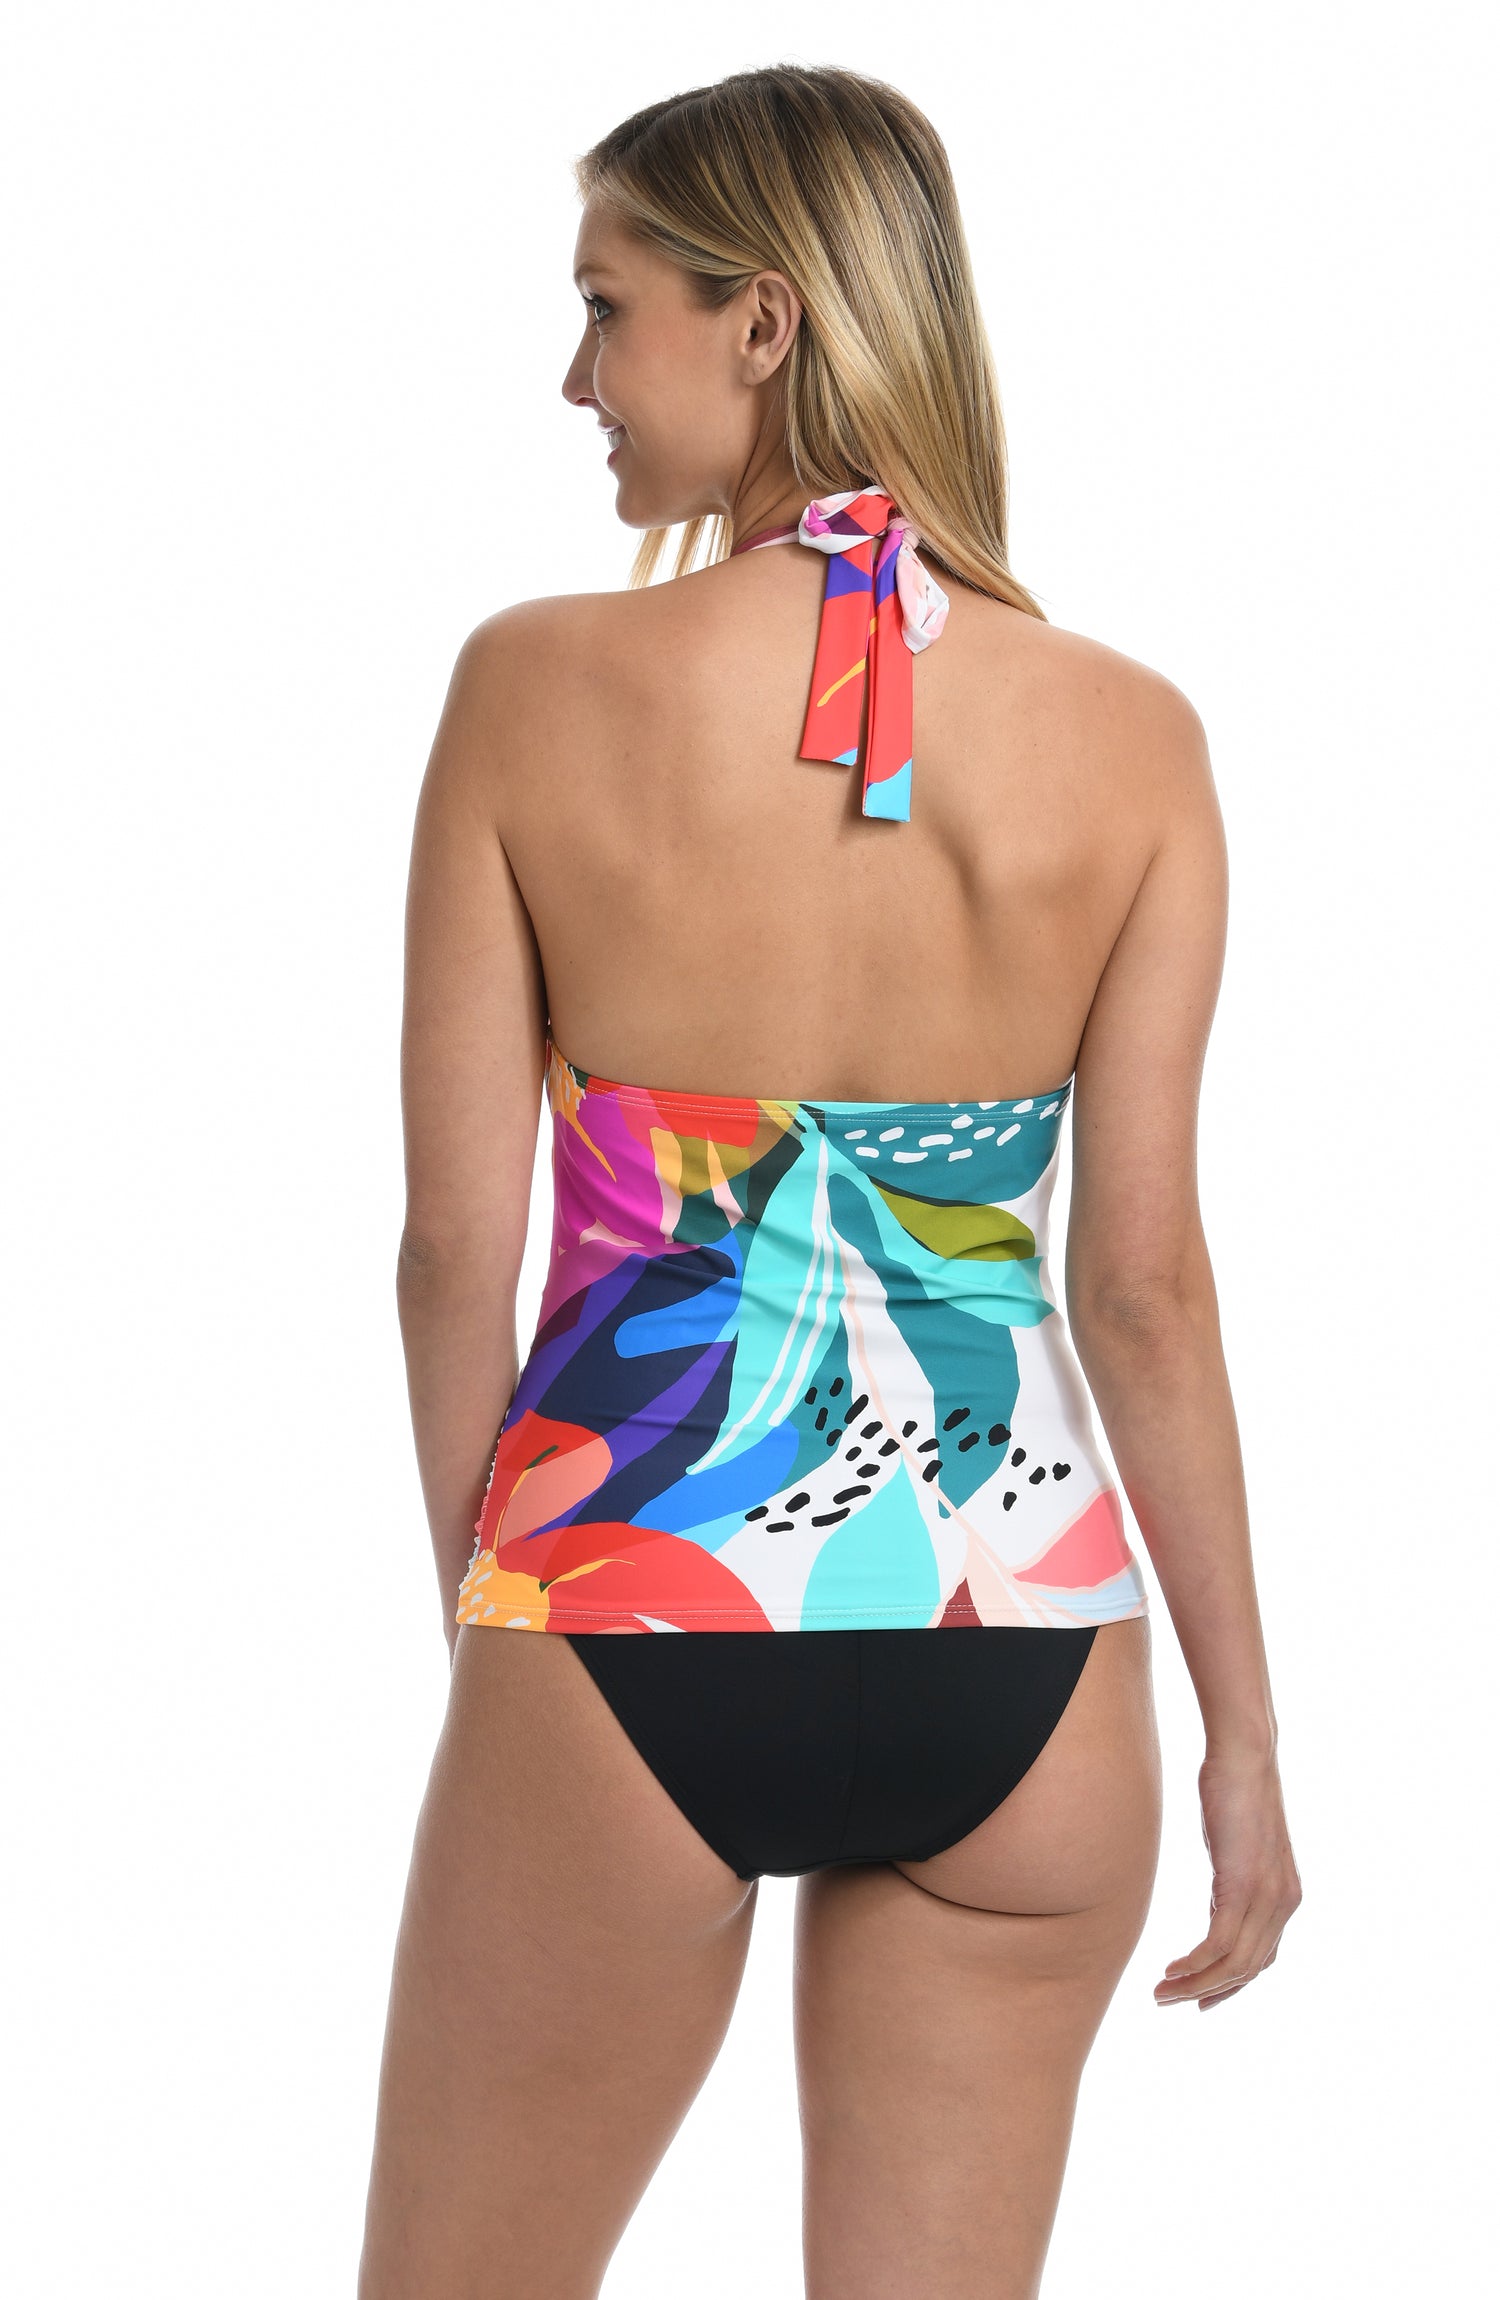 Model is wearing a multi colored tropical printed halter tankini swimsuit top from our Eclectic Shore collection.